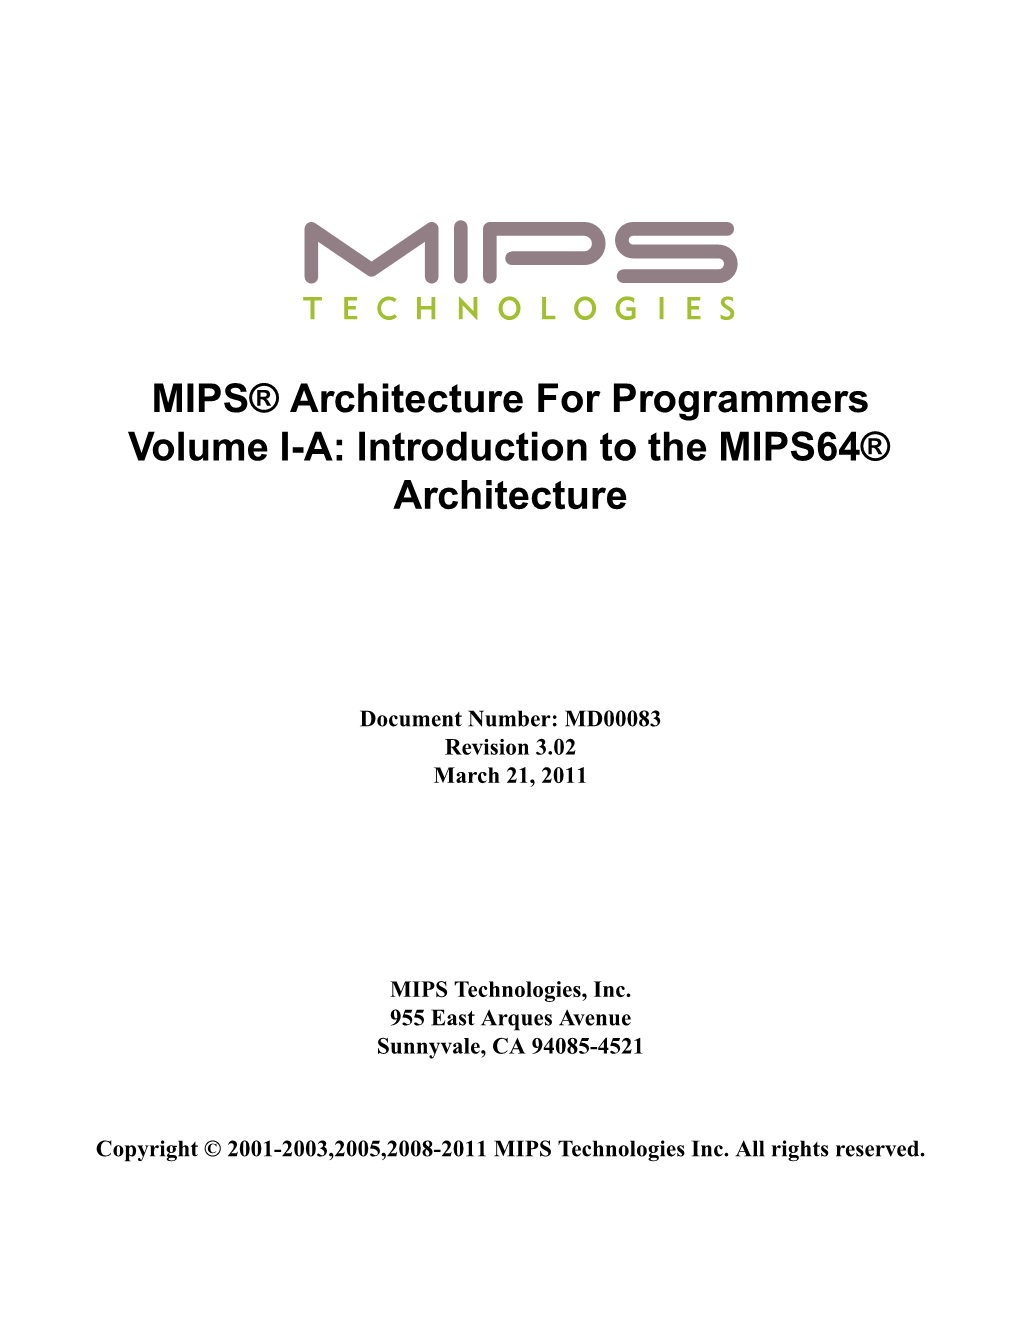 The MIPS Architecture: an Introduction